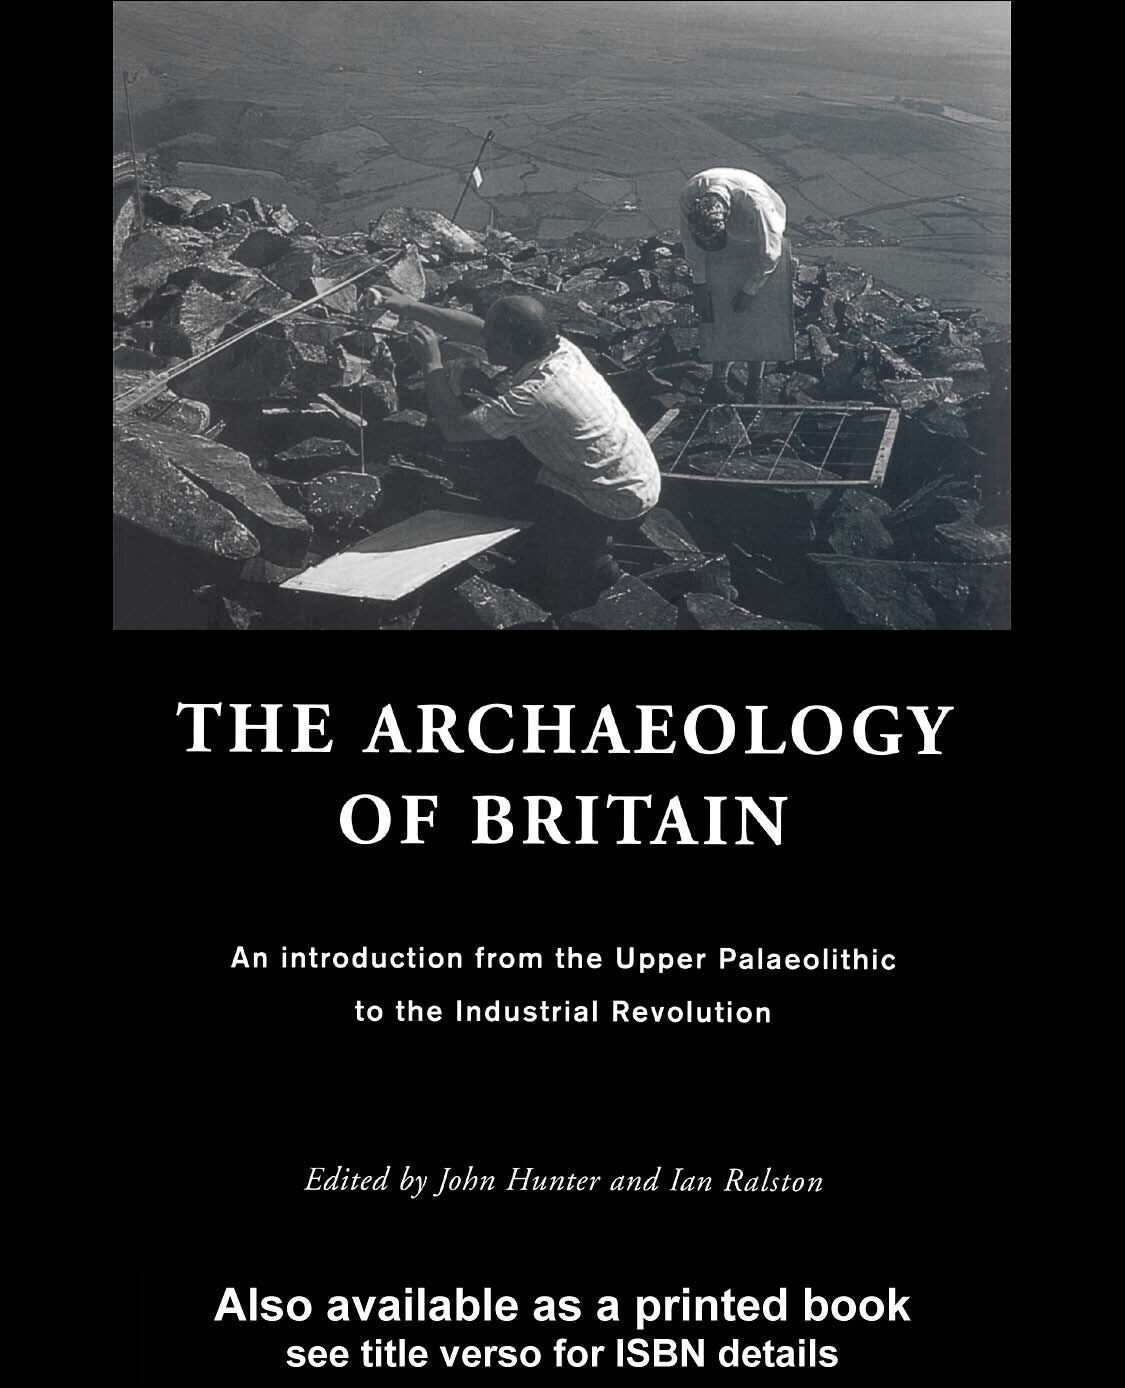 The Archaeology of Britain: An introduction from the Upper Palaeolithic to the Industrial Revolution